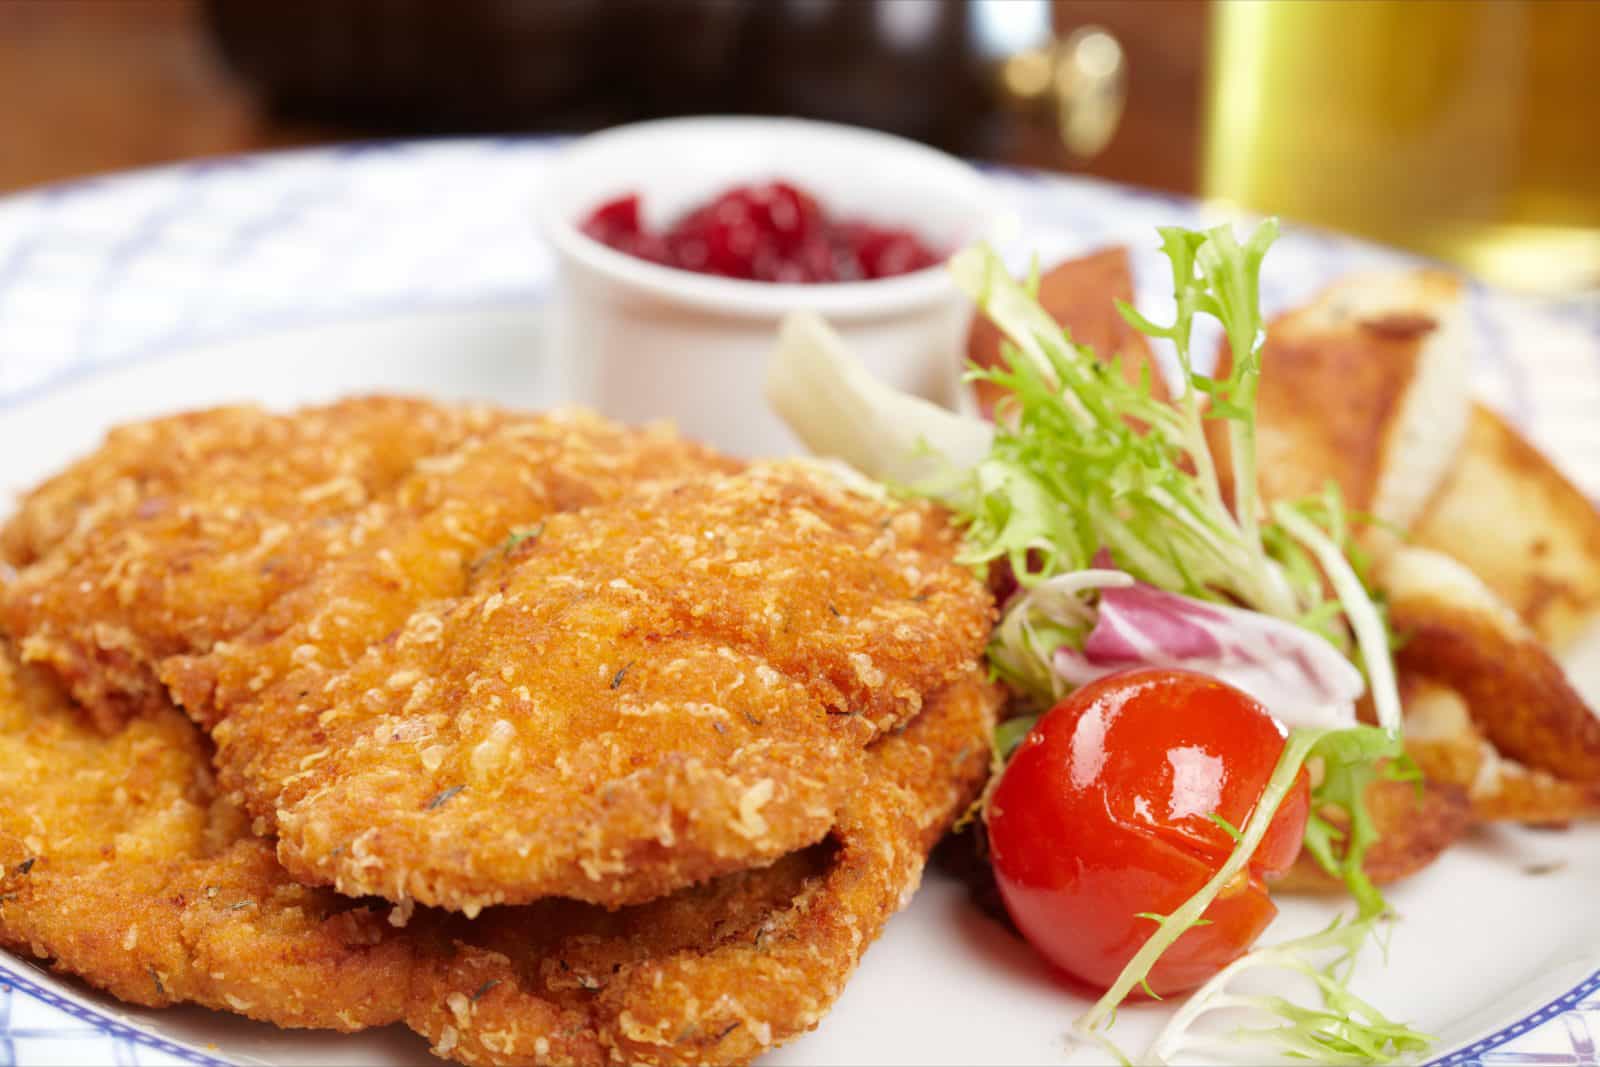 Image of a schnitzel on a plate